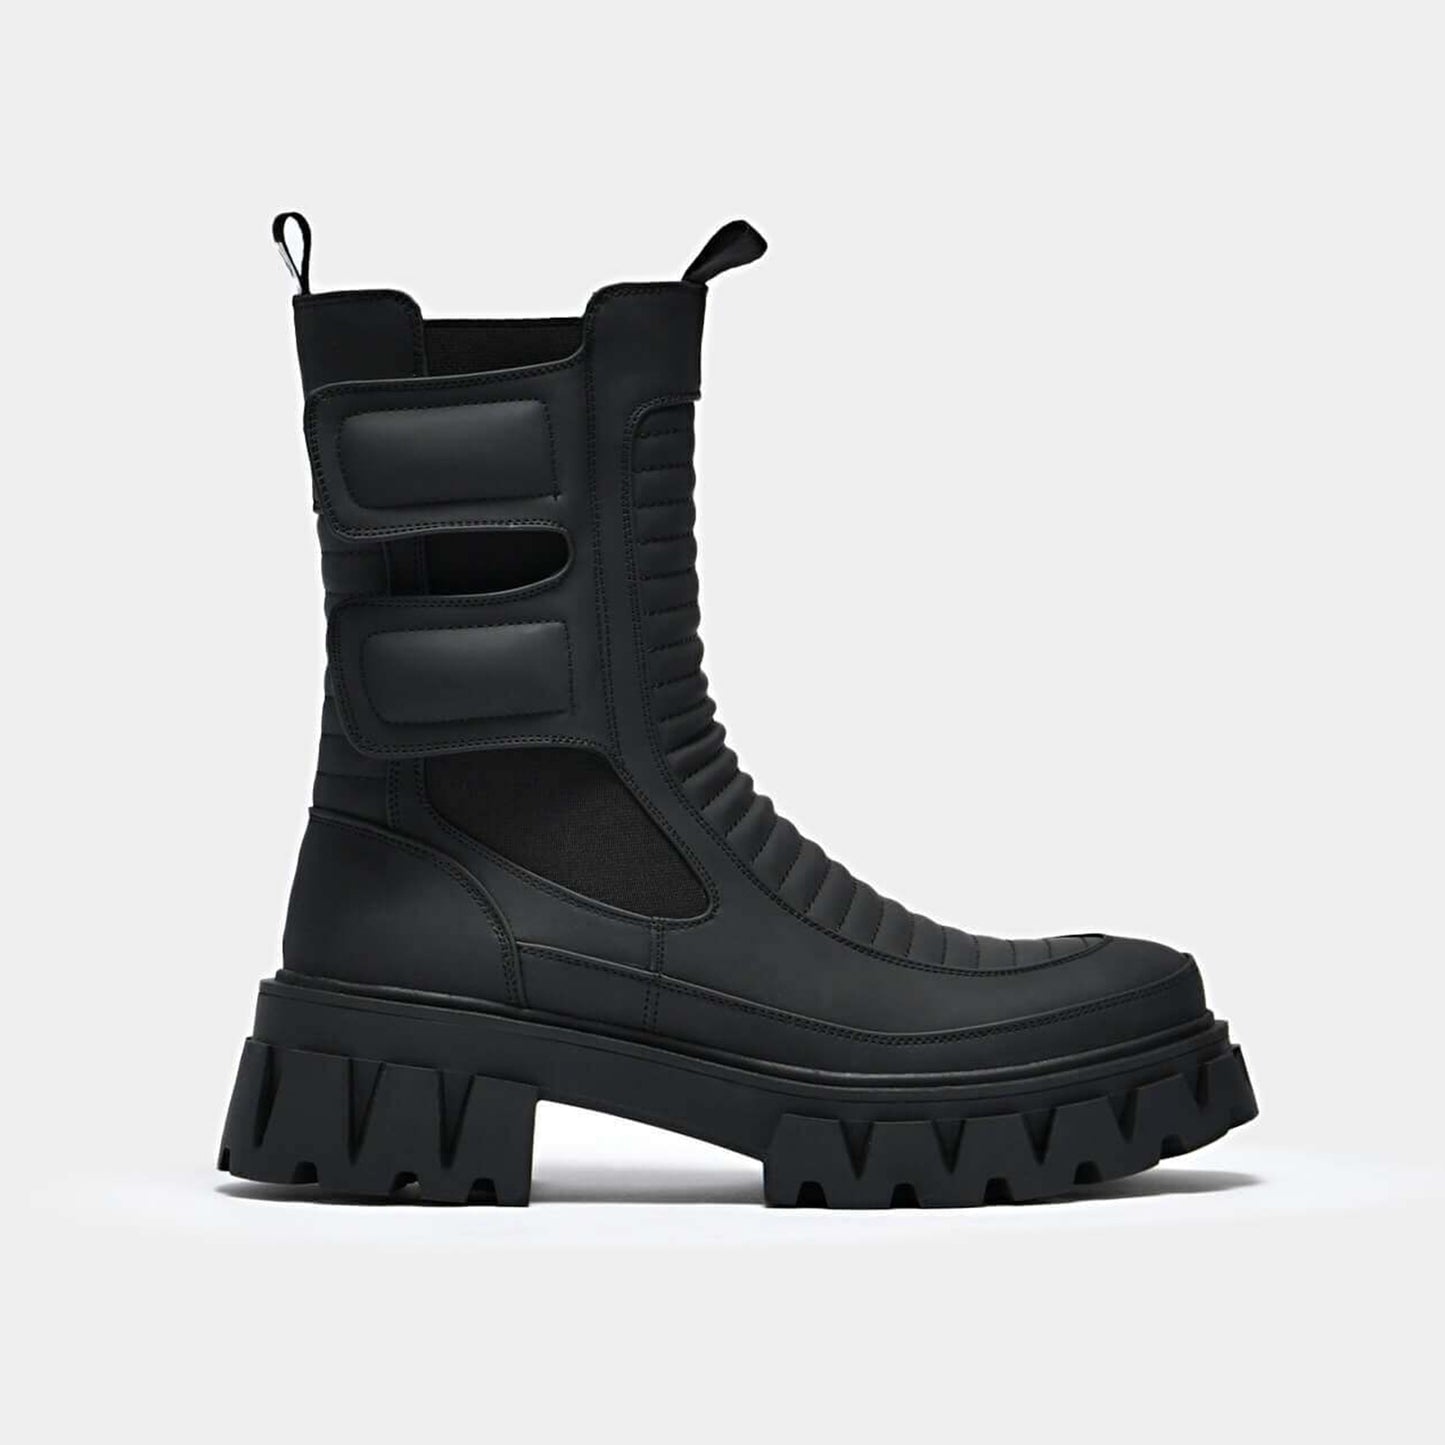 Vader Padded Croft Boots - Ankle Boots - KOI Footwear - Black - Side View